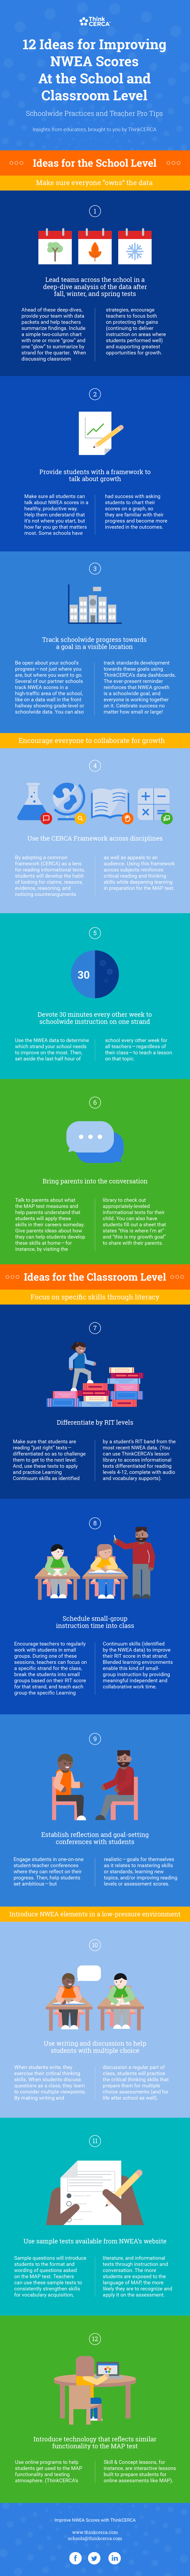 12-Ideas-for-Improving-NWEA-Scores-at-the-School-and-Classroom-Level-ThinkCERCA.png